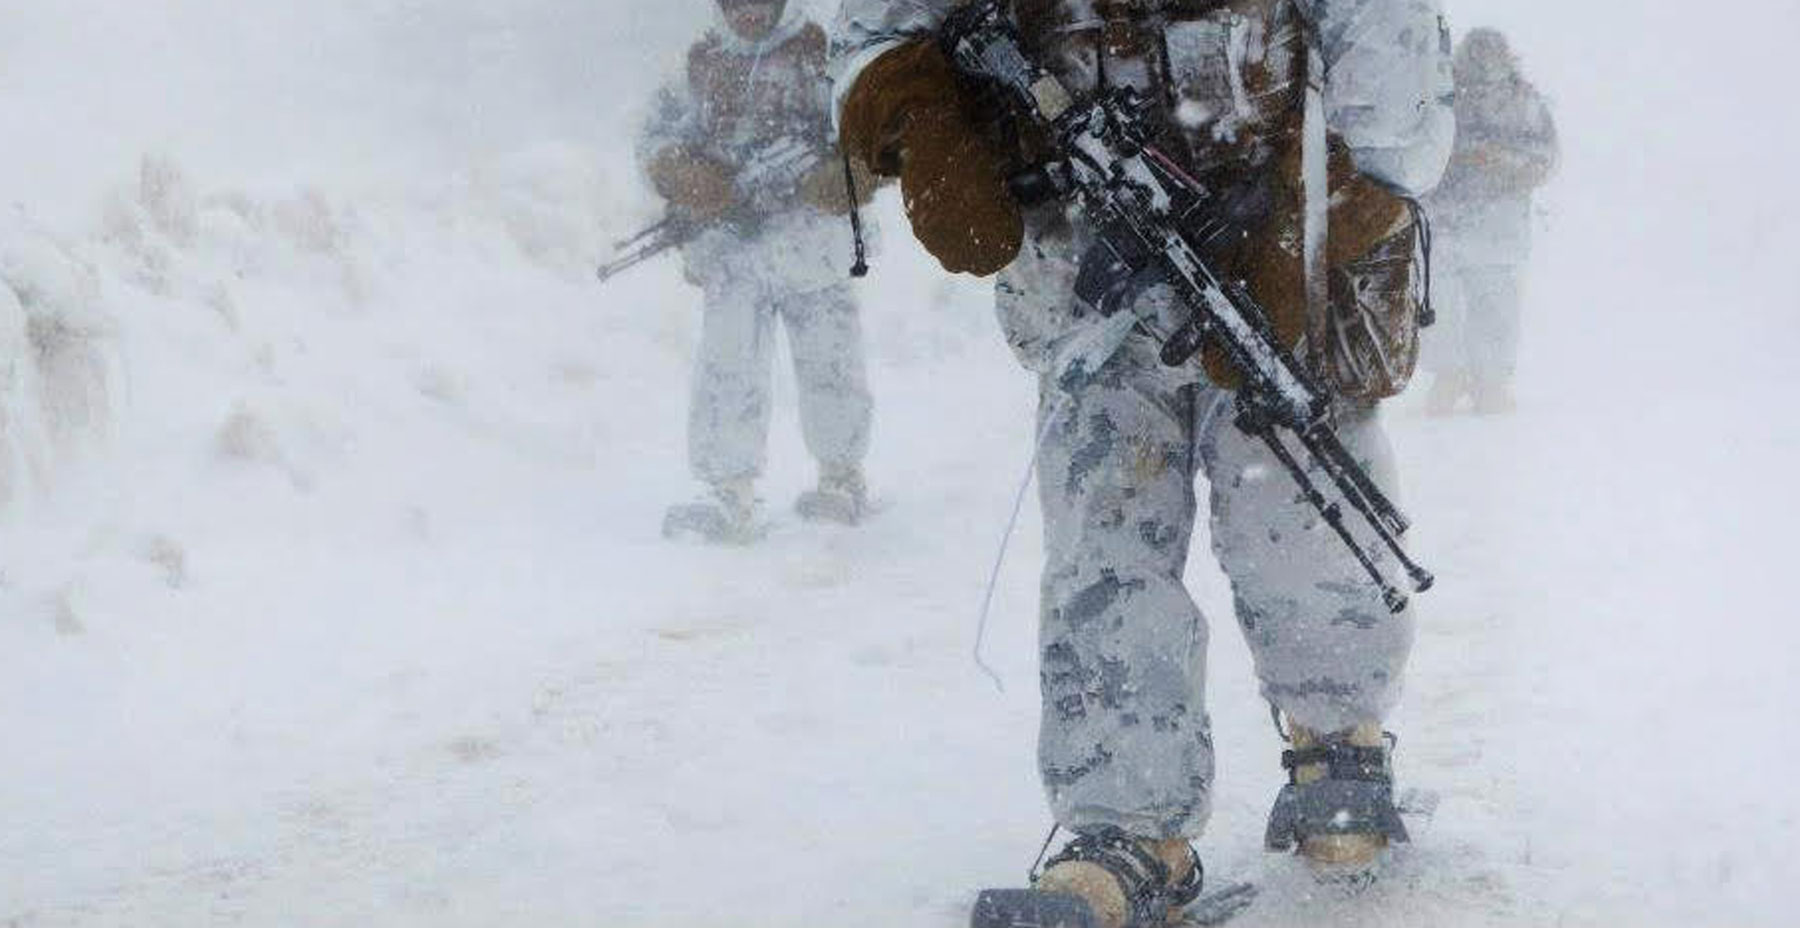 Soldiers in snow wearing Vapor Barrier Bunny Boots